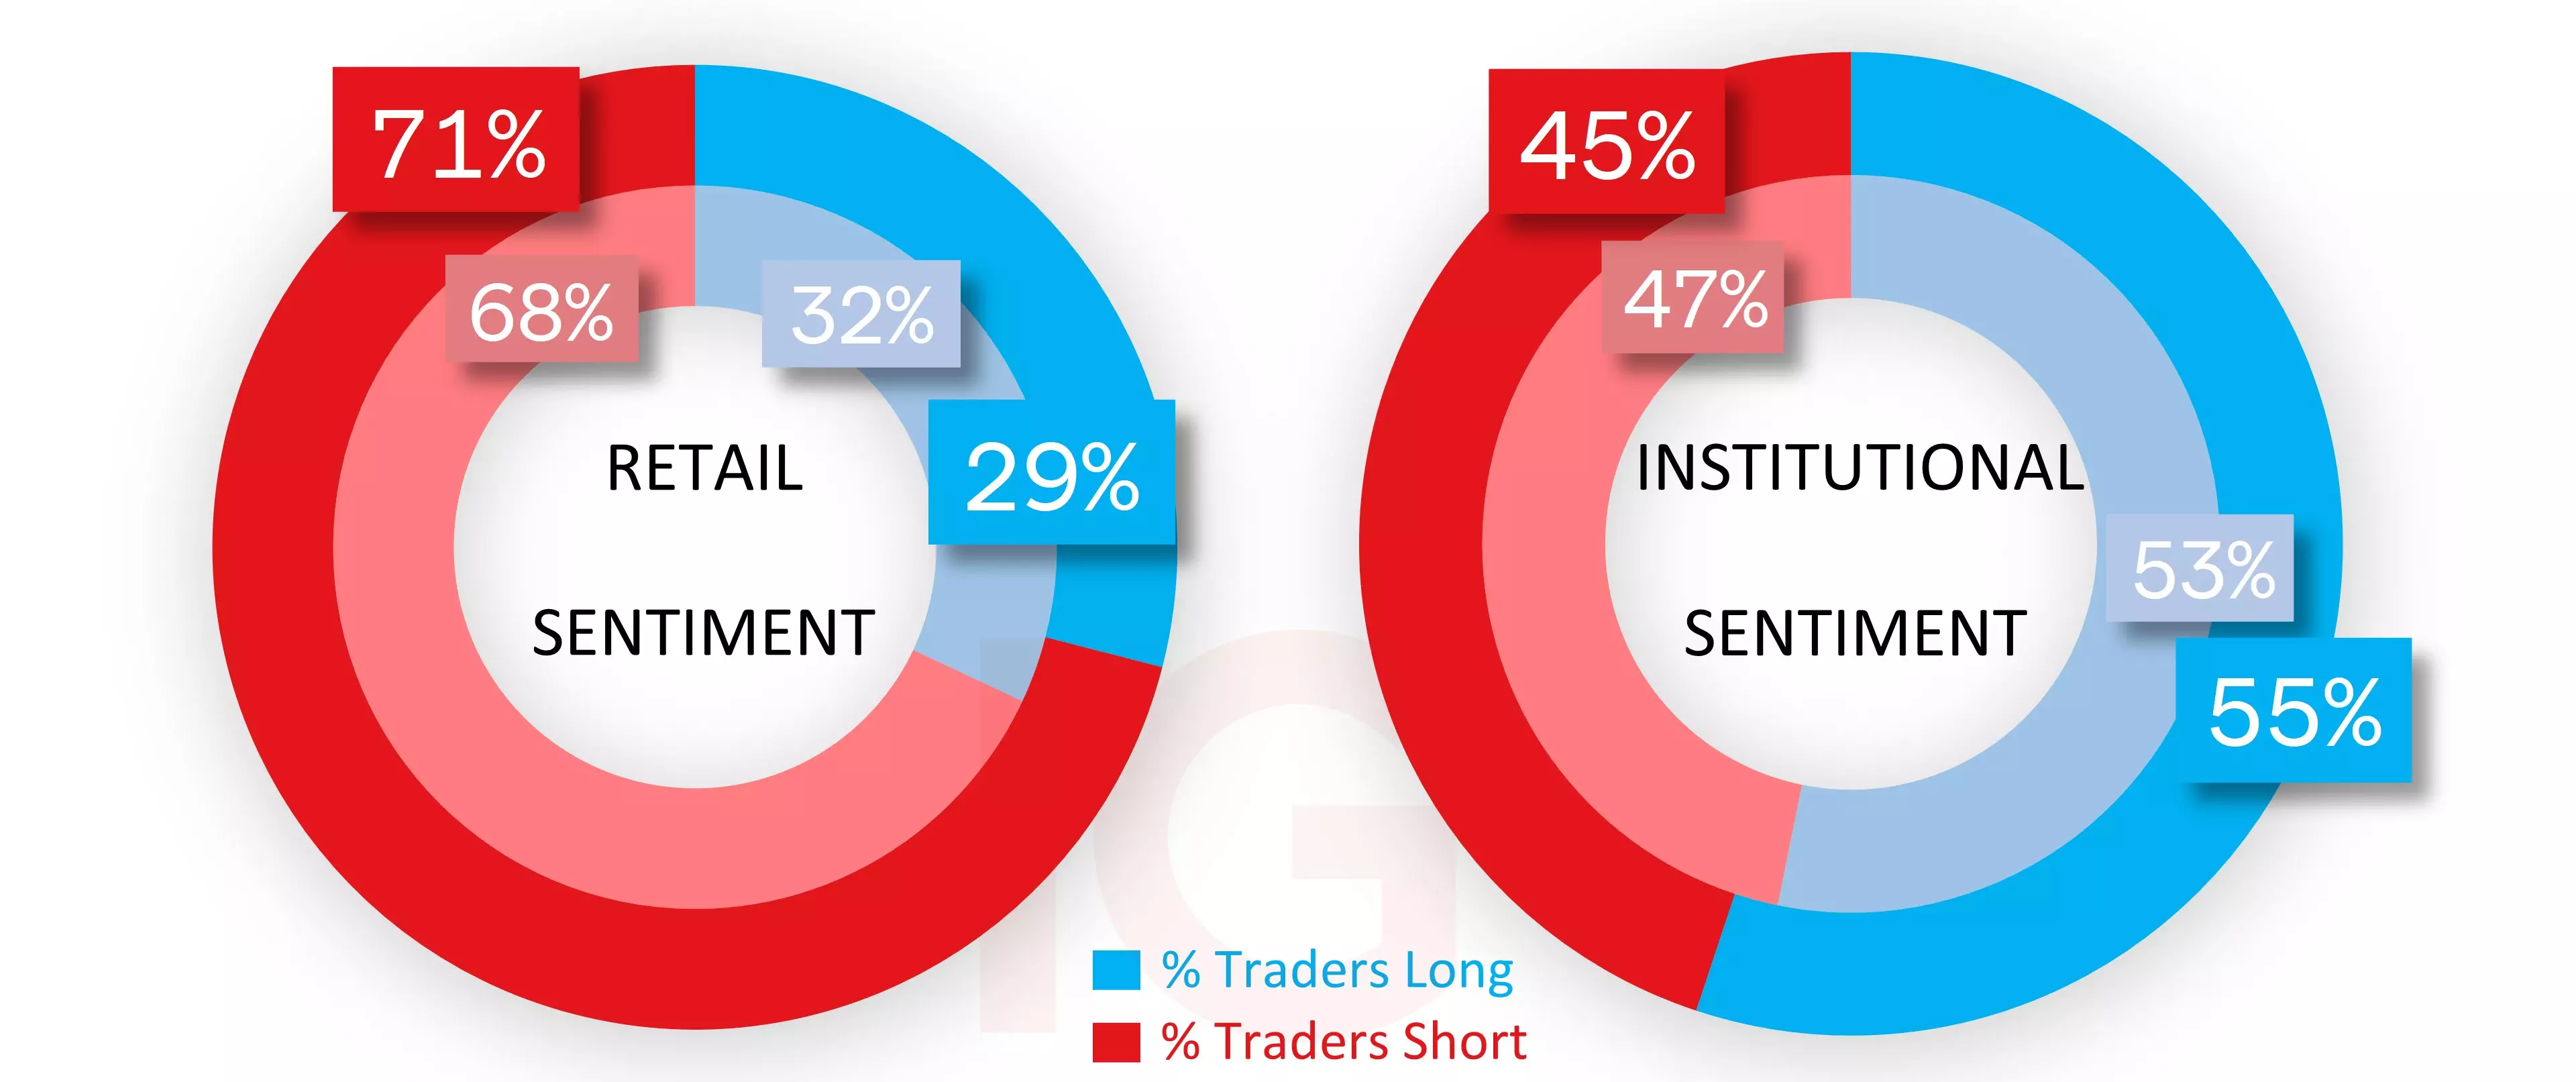 Client and CoT sentiment for the Nasdaq 100